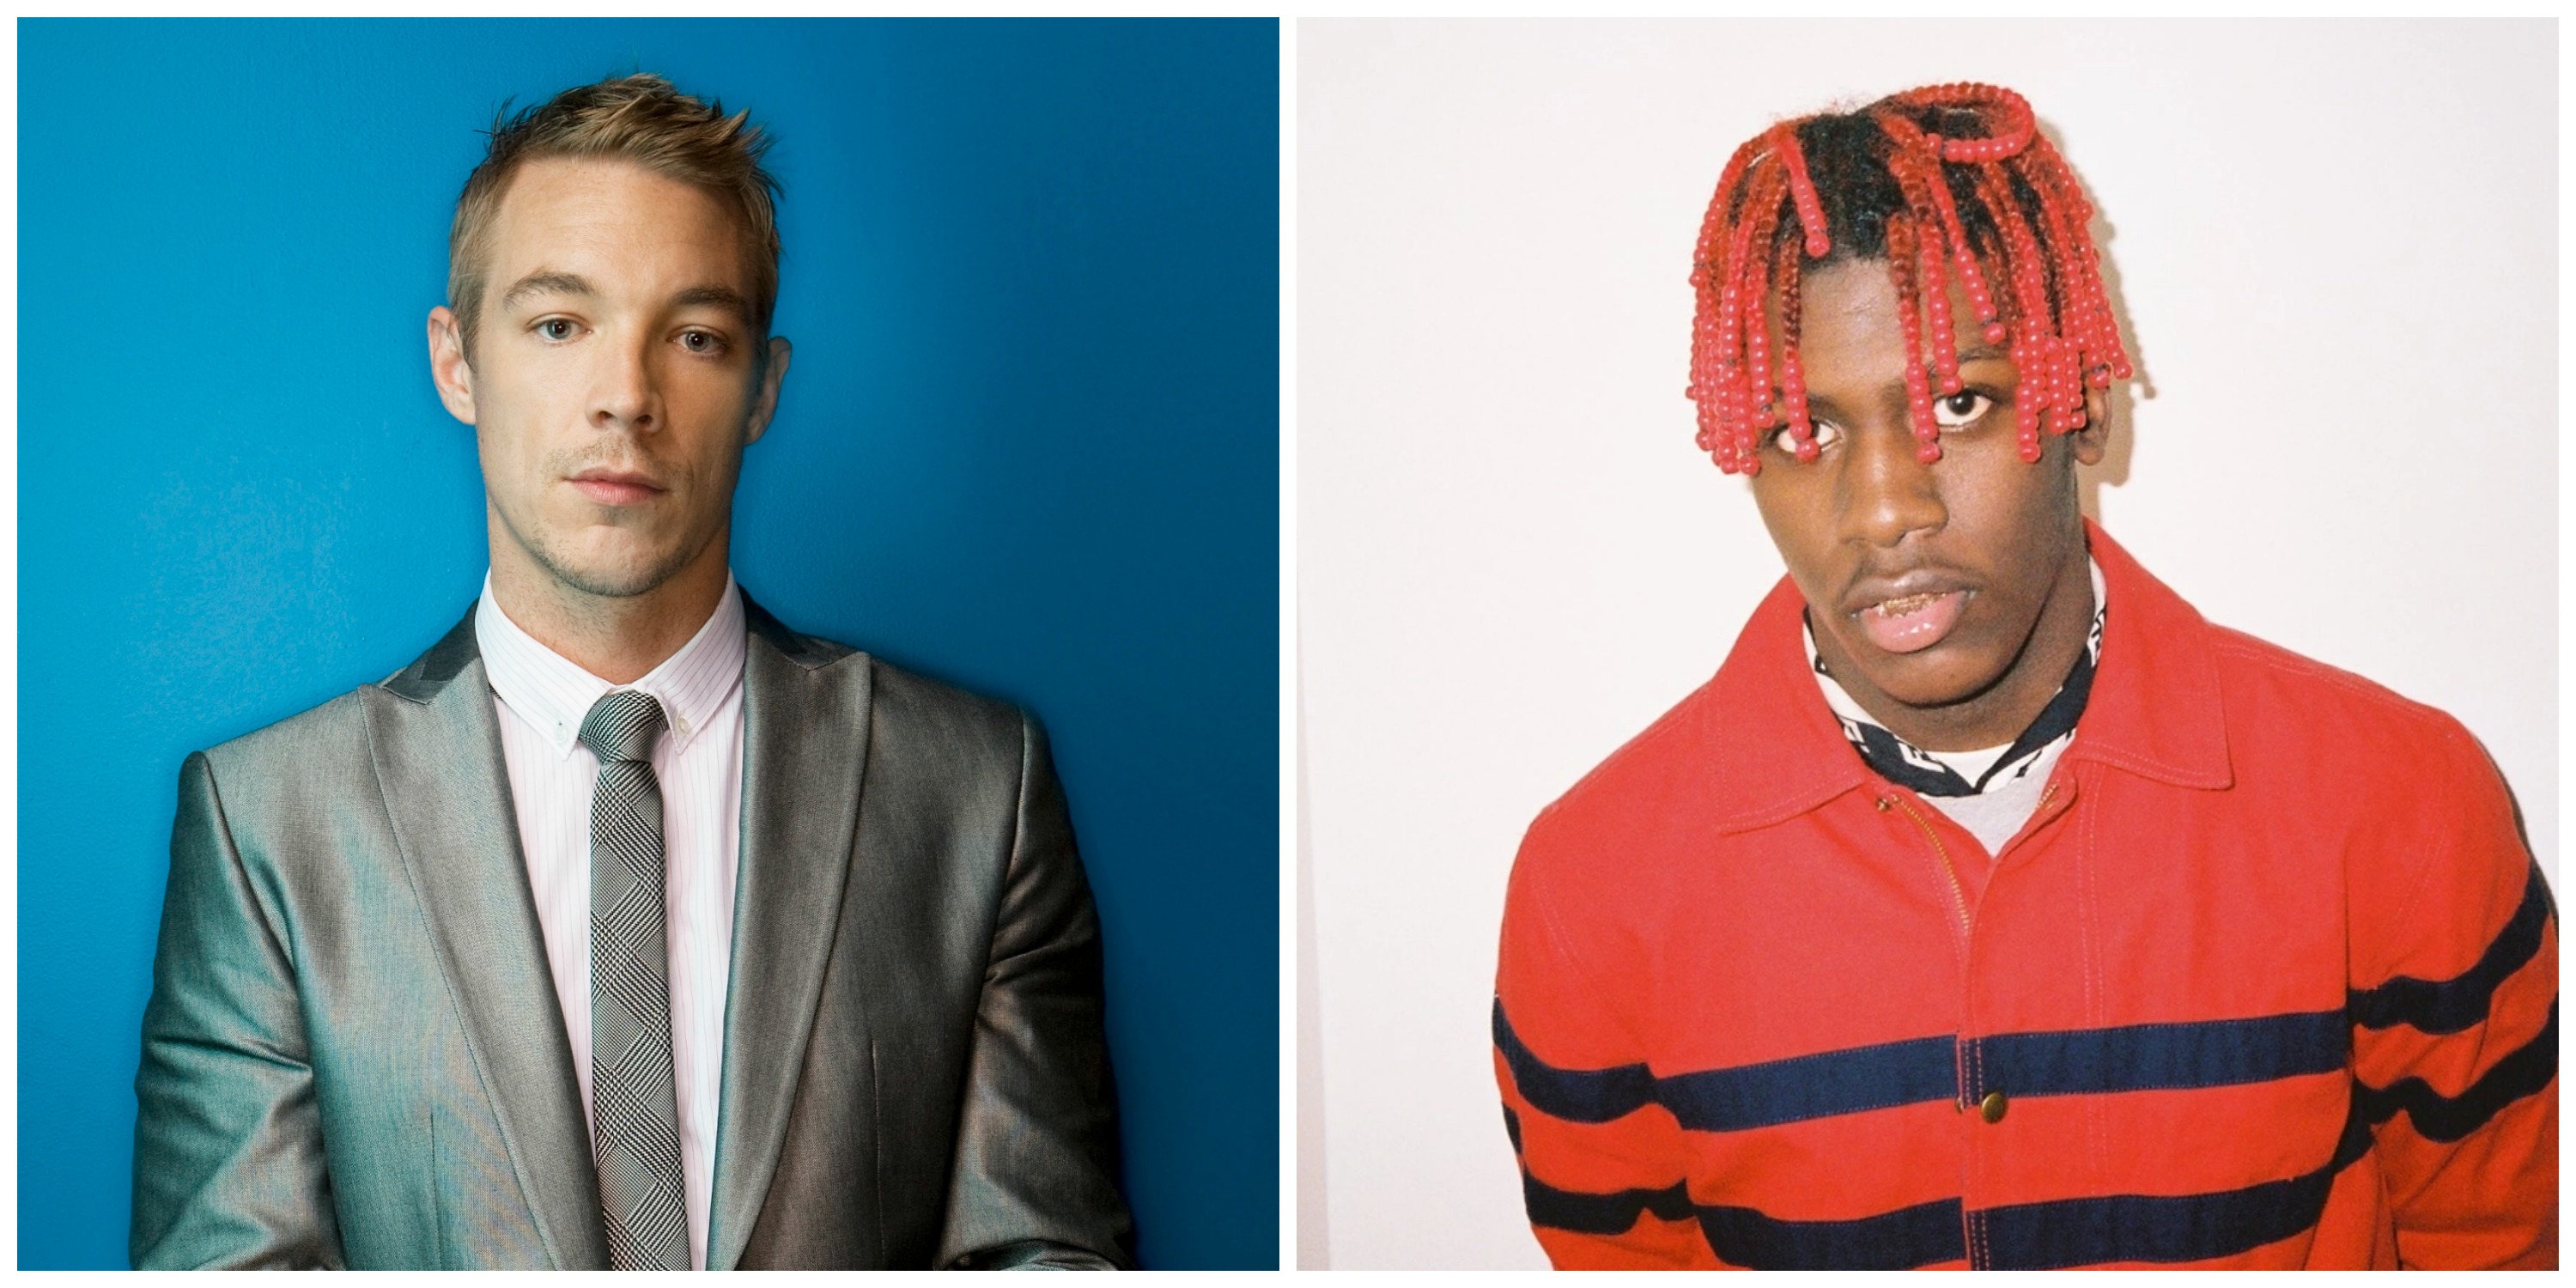 Diplo Announces He's Working with Upcoming Hip-Hop Star Lil Yachty and Santigold - GDE.